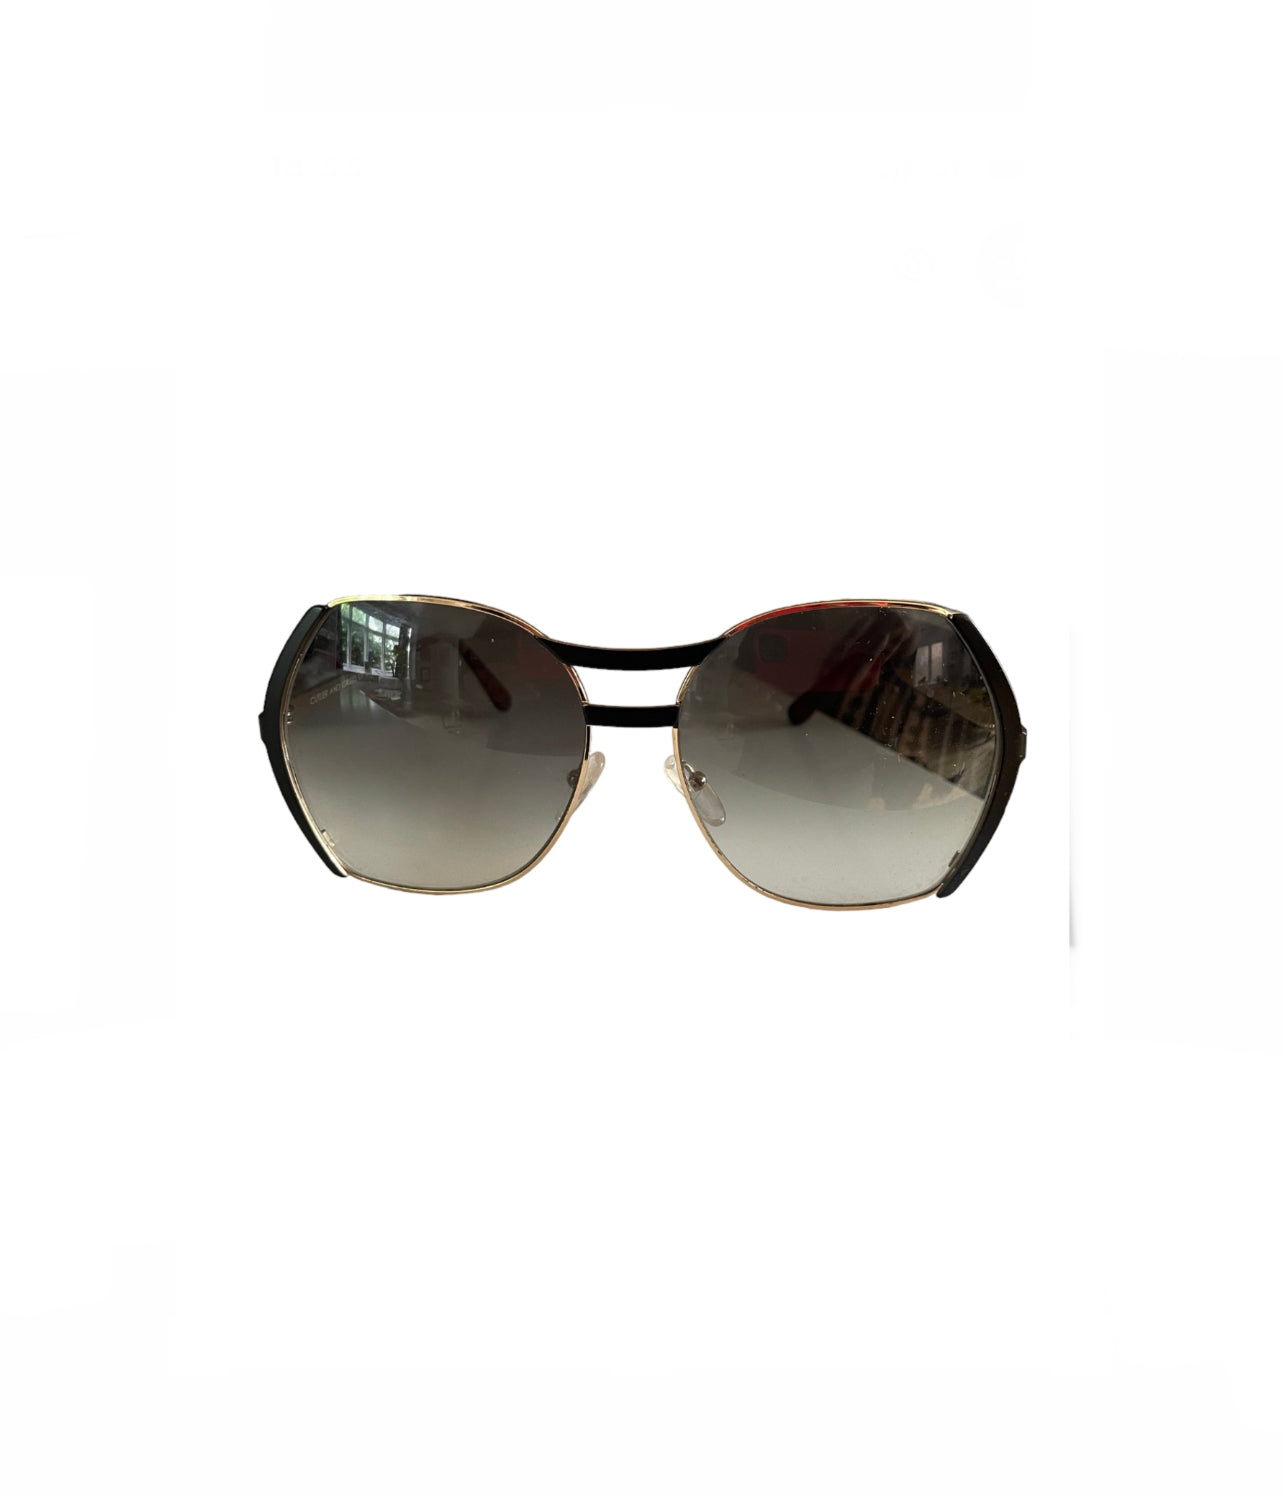 Cutler and Gross 70s Style Sunglasses